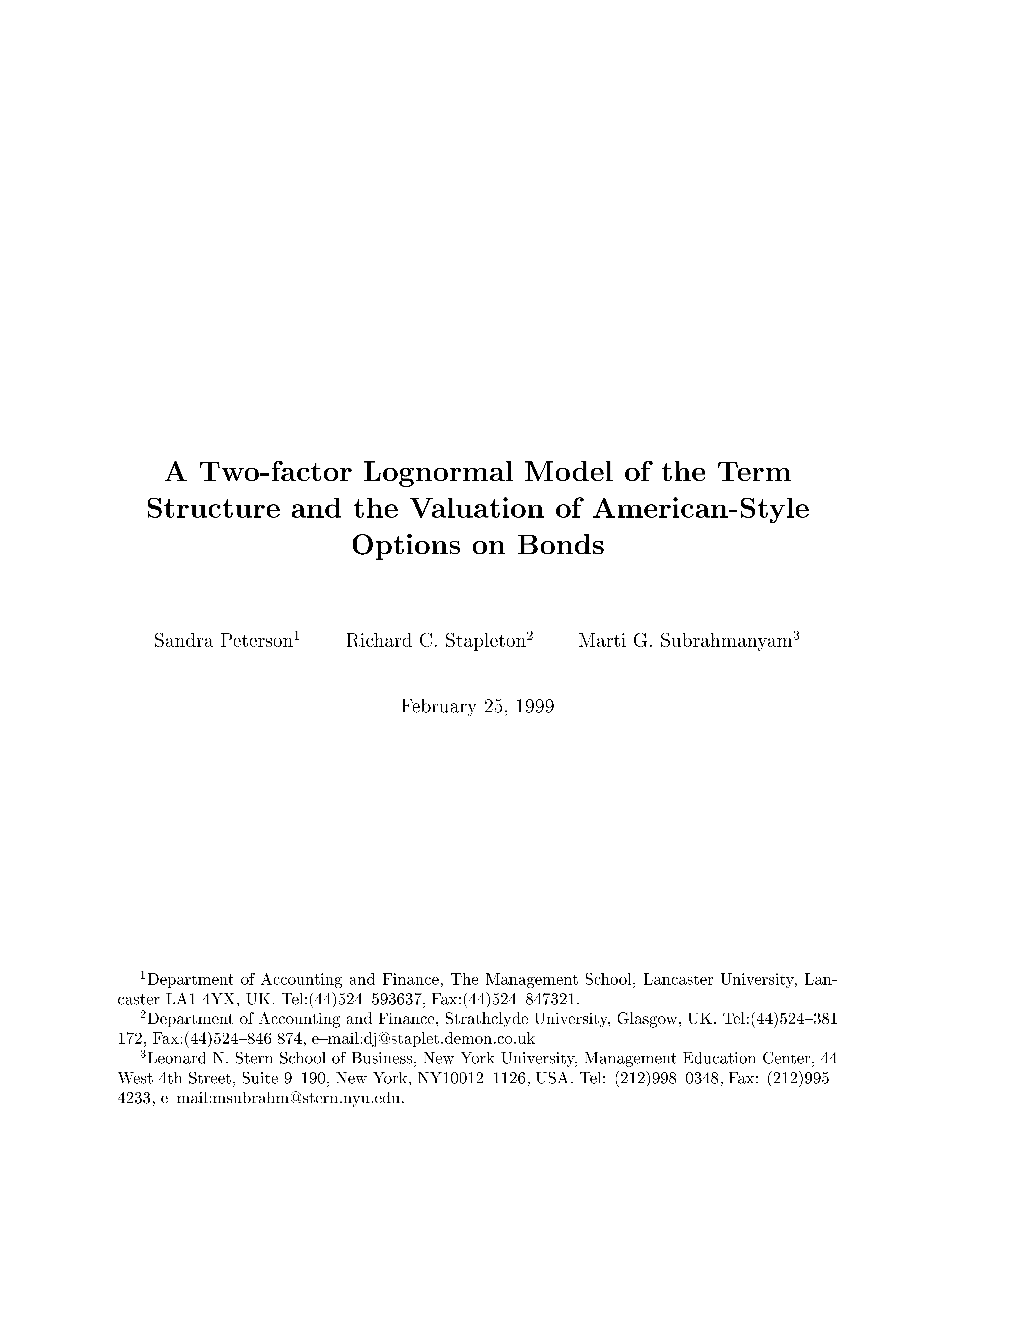 A Two-Factor Lognormal Model of the Term Structure and the Valuation Of